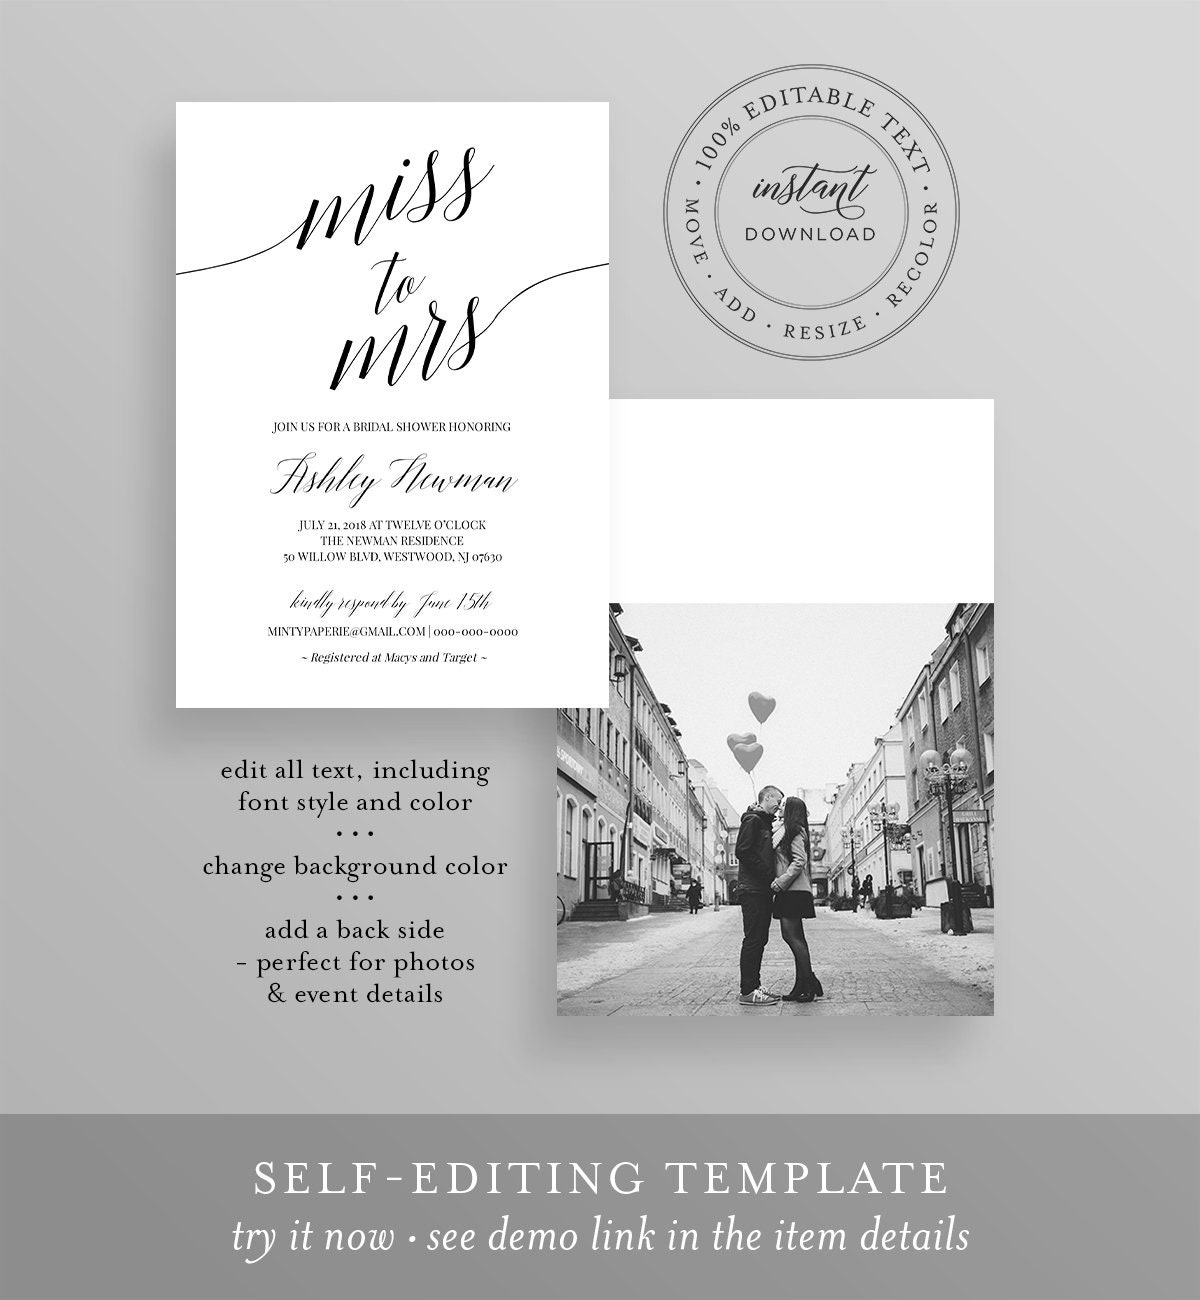 bridal-shower-invitation-template-printable-wedding-shower-invite-miss-to-mrs-instant